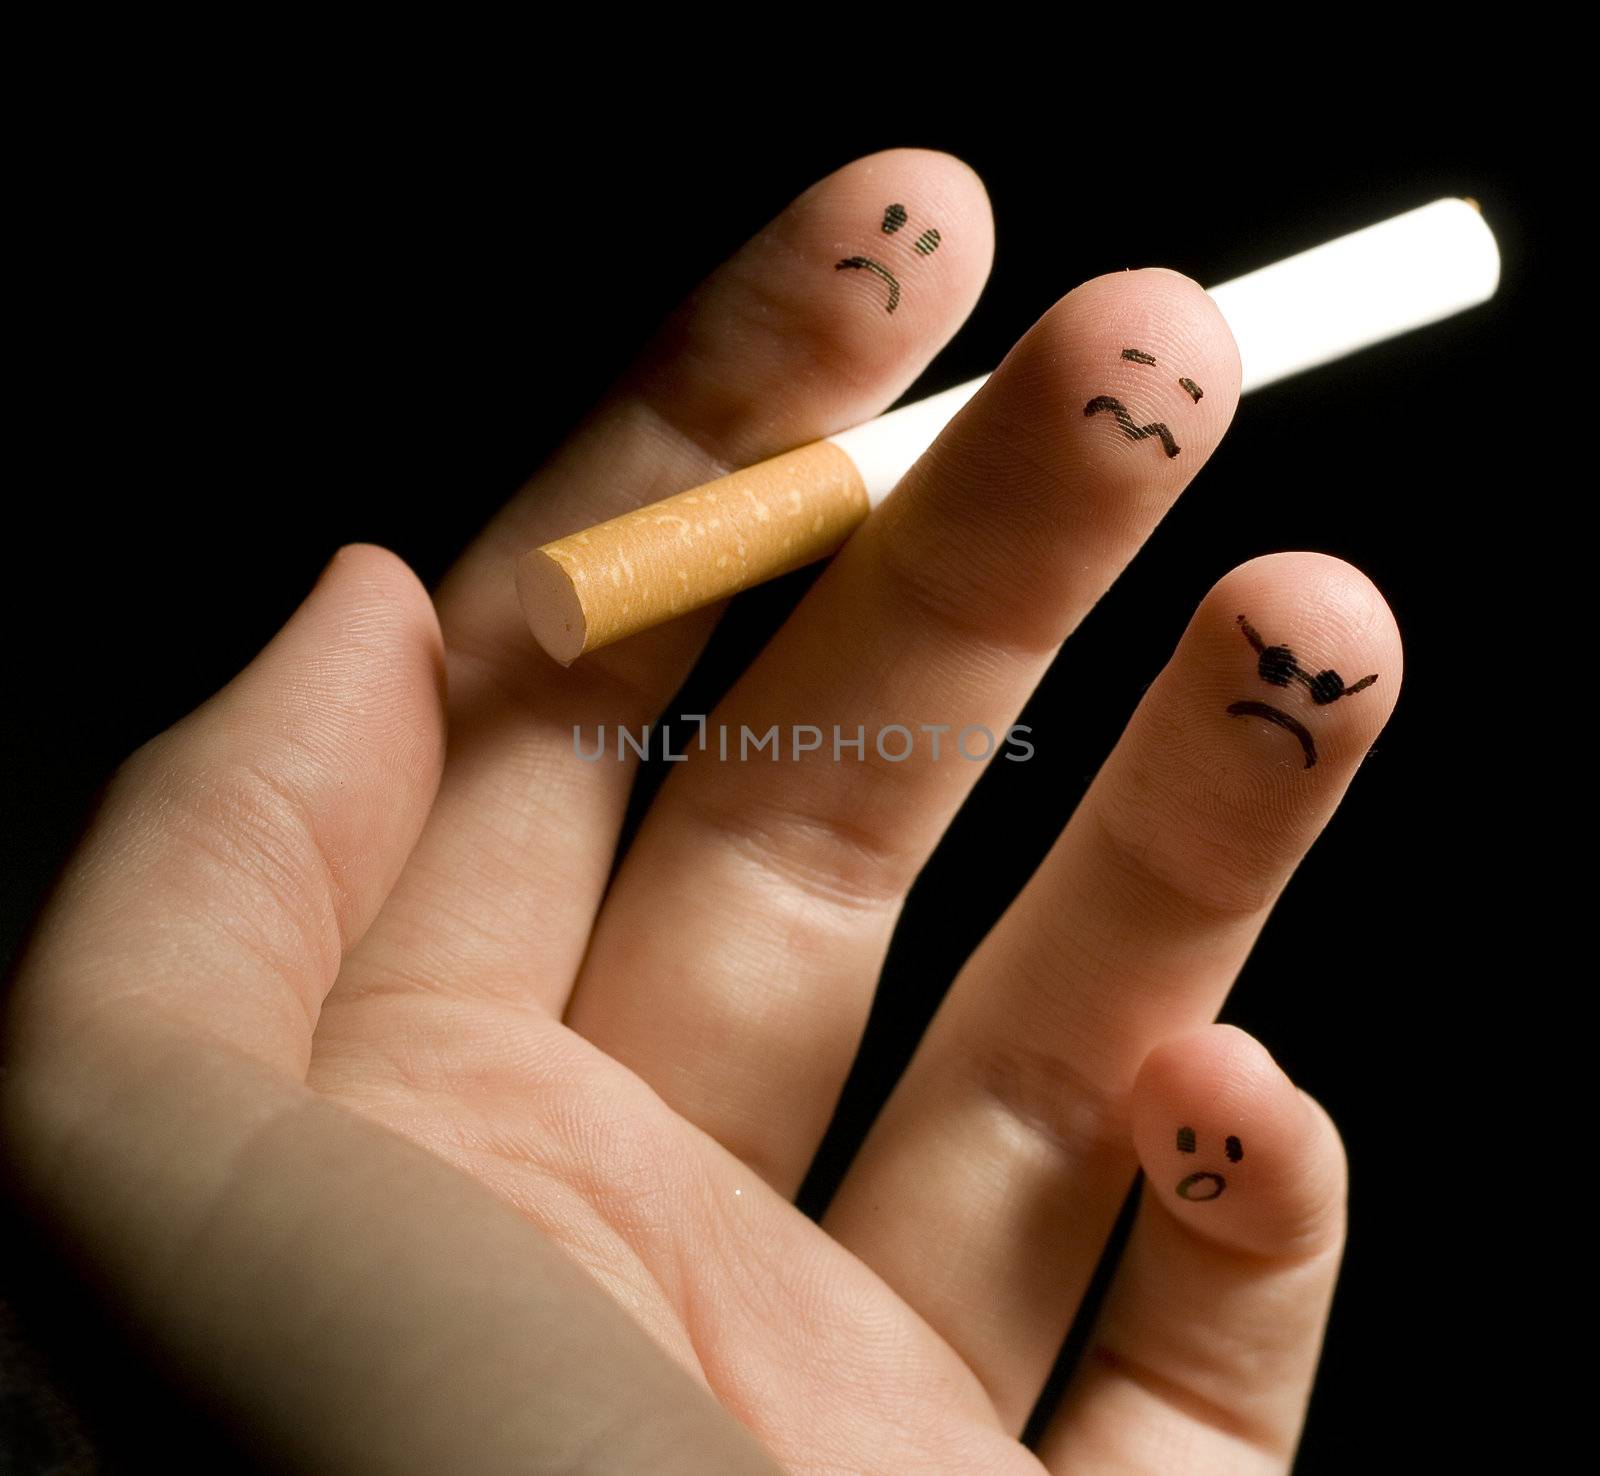 
Fingers holding cigarette. Sad smiley painted on fingertips. Conception of addiction and anti-smoking.